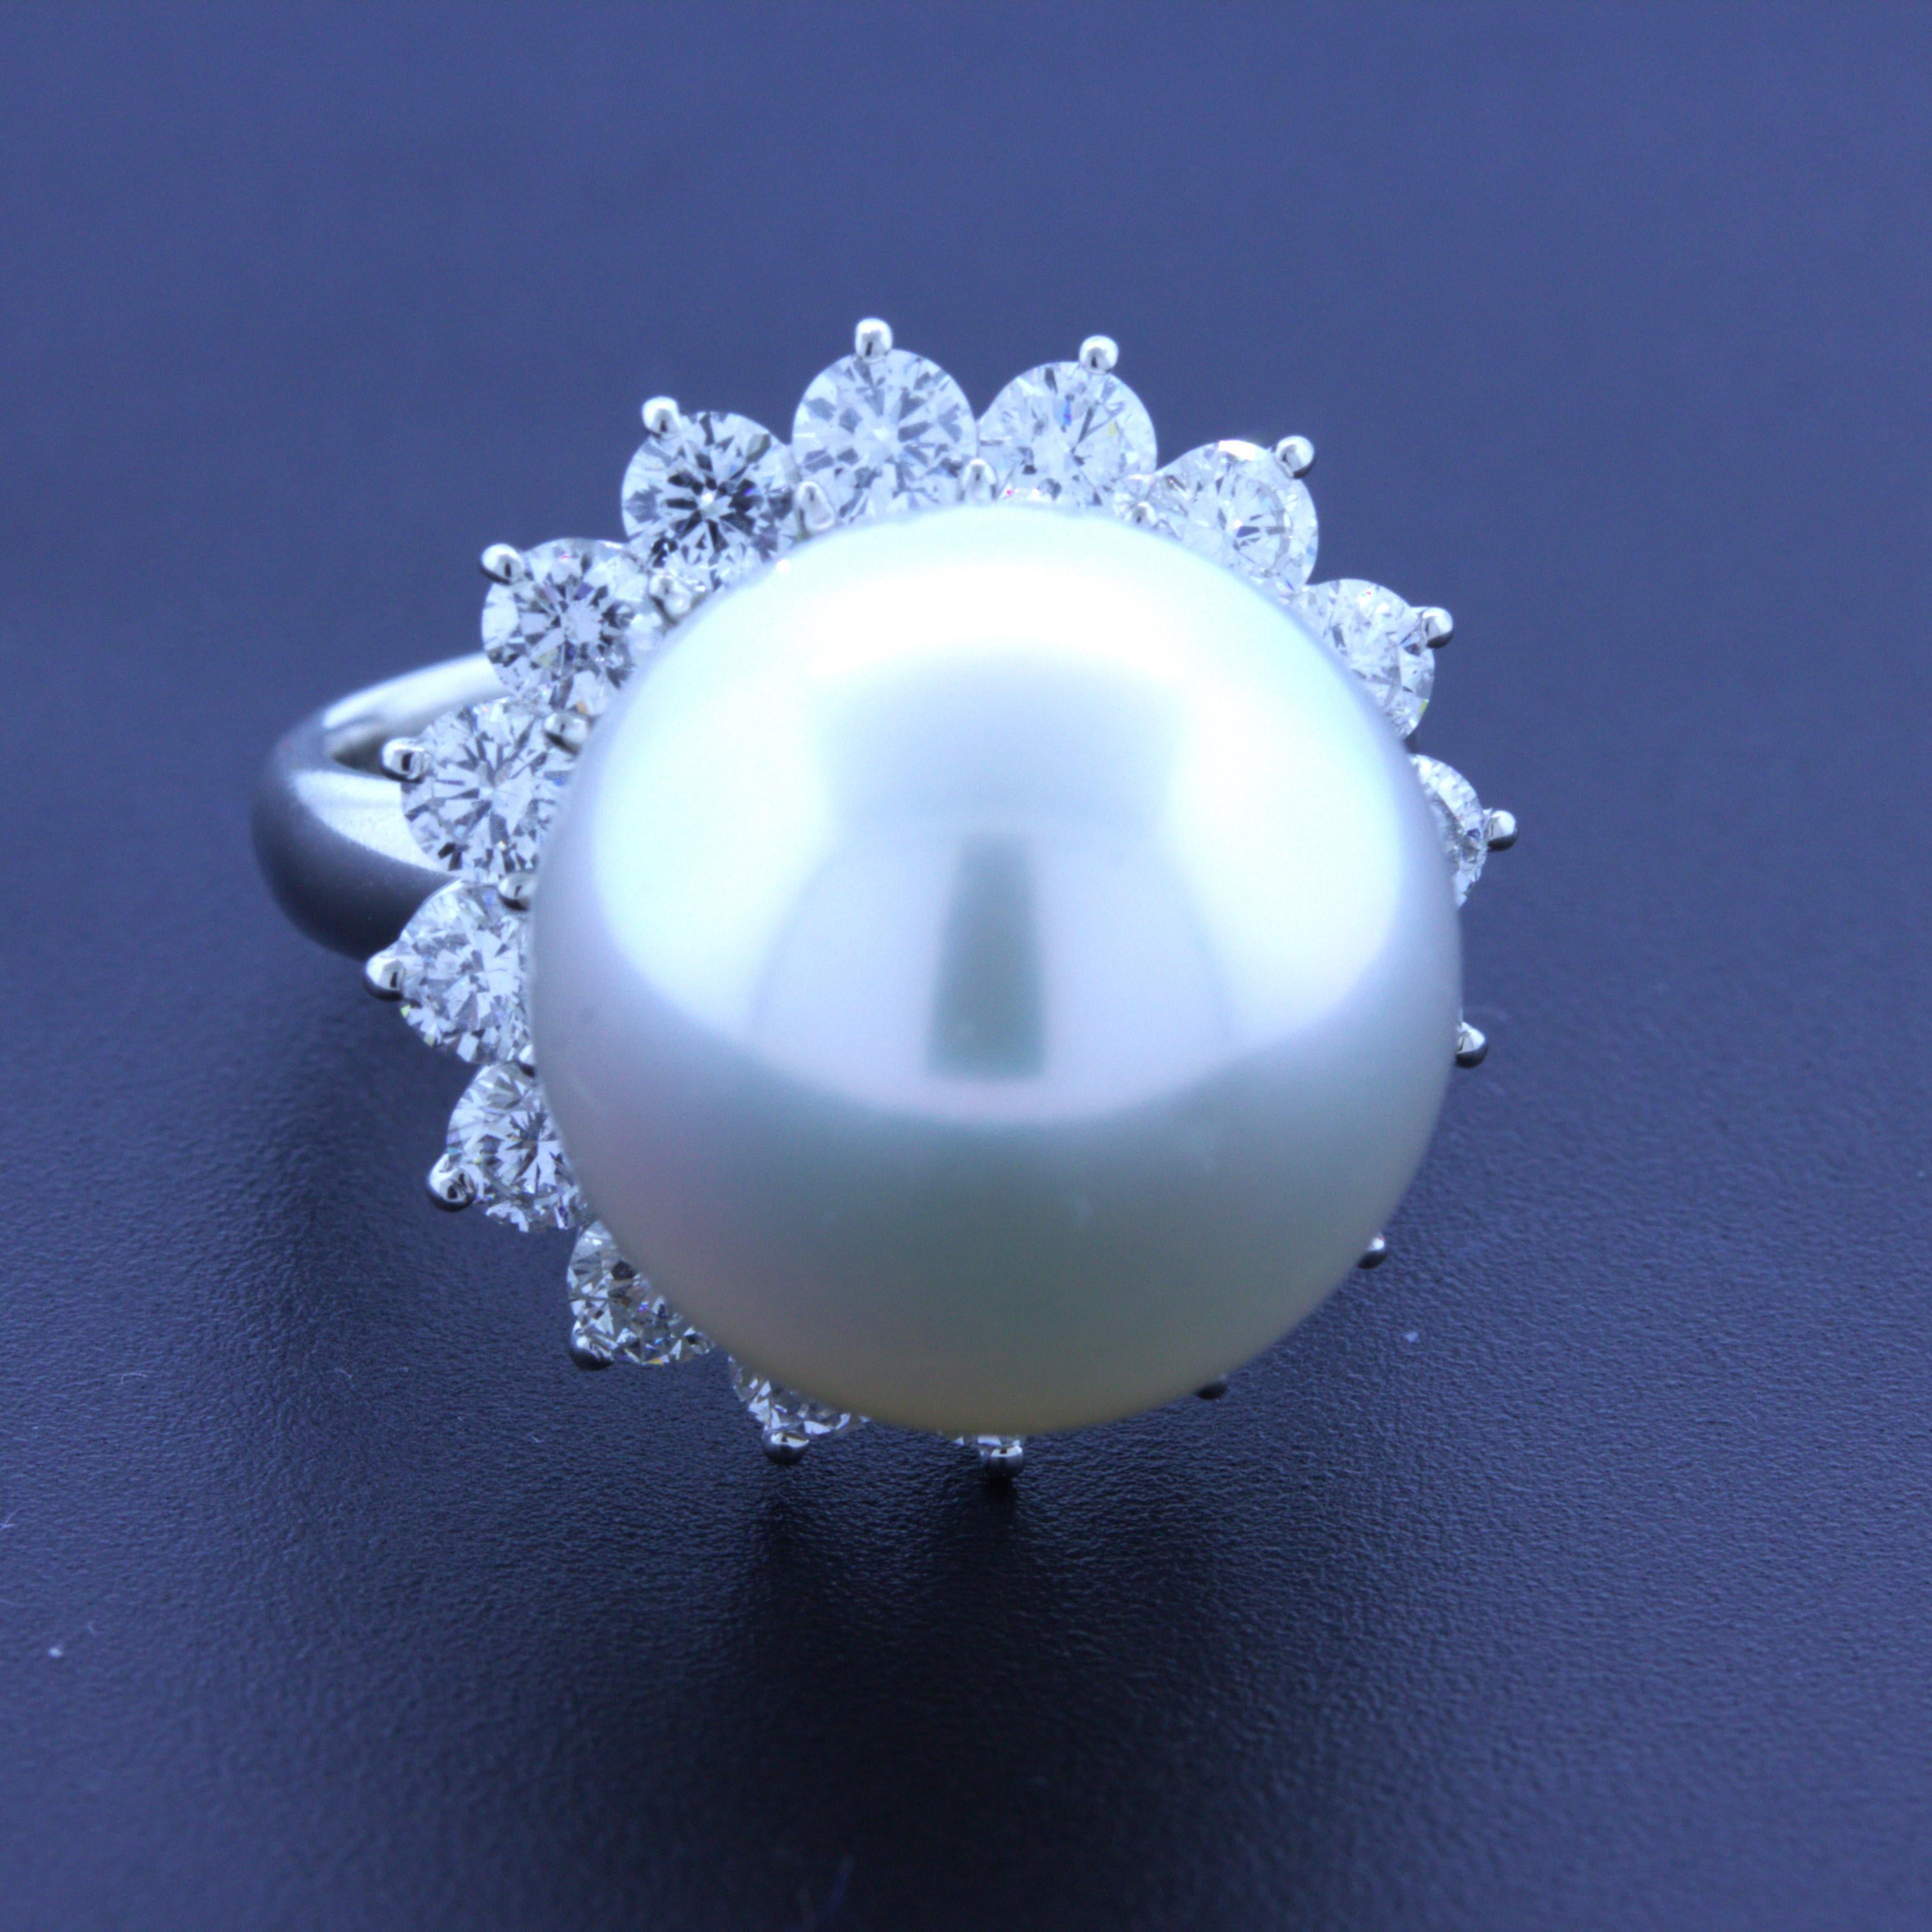 A very fine ring featuring an AAA quality South Sea pearl. What makes this pearl such fine quality is its combination of a perfectly round shape, strong luster and overtone, and its nacre quality which makes the pearl glow in the light. It is